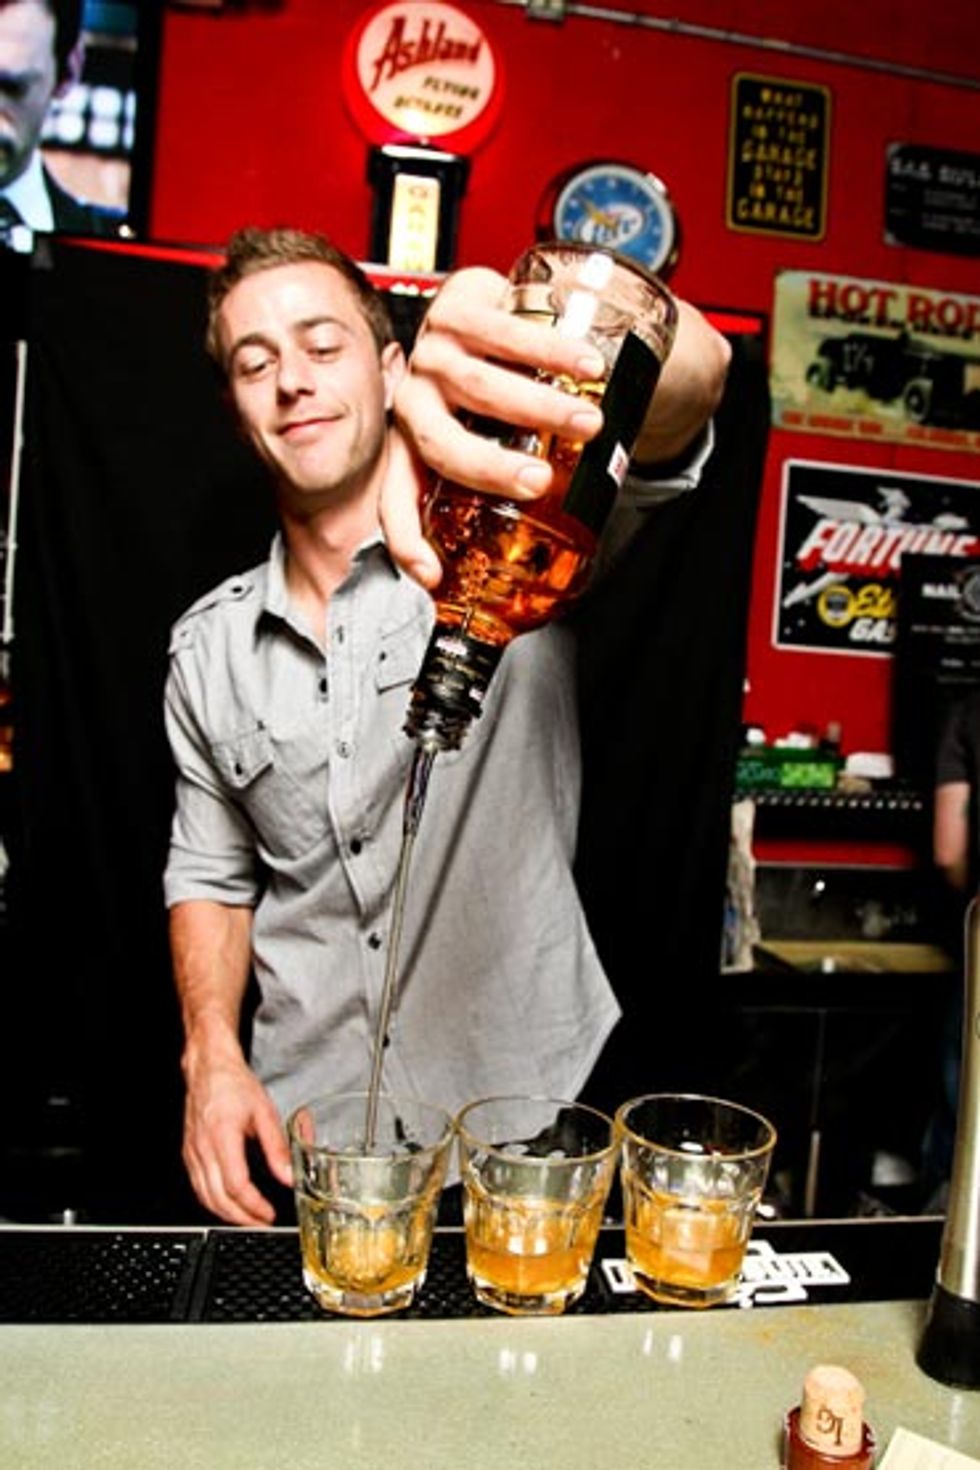 The Quest for the Perfect Drambuie Cocktail Begins with 2012's Nail or Fail Showdown